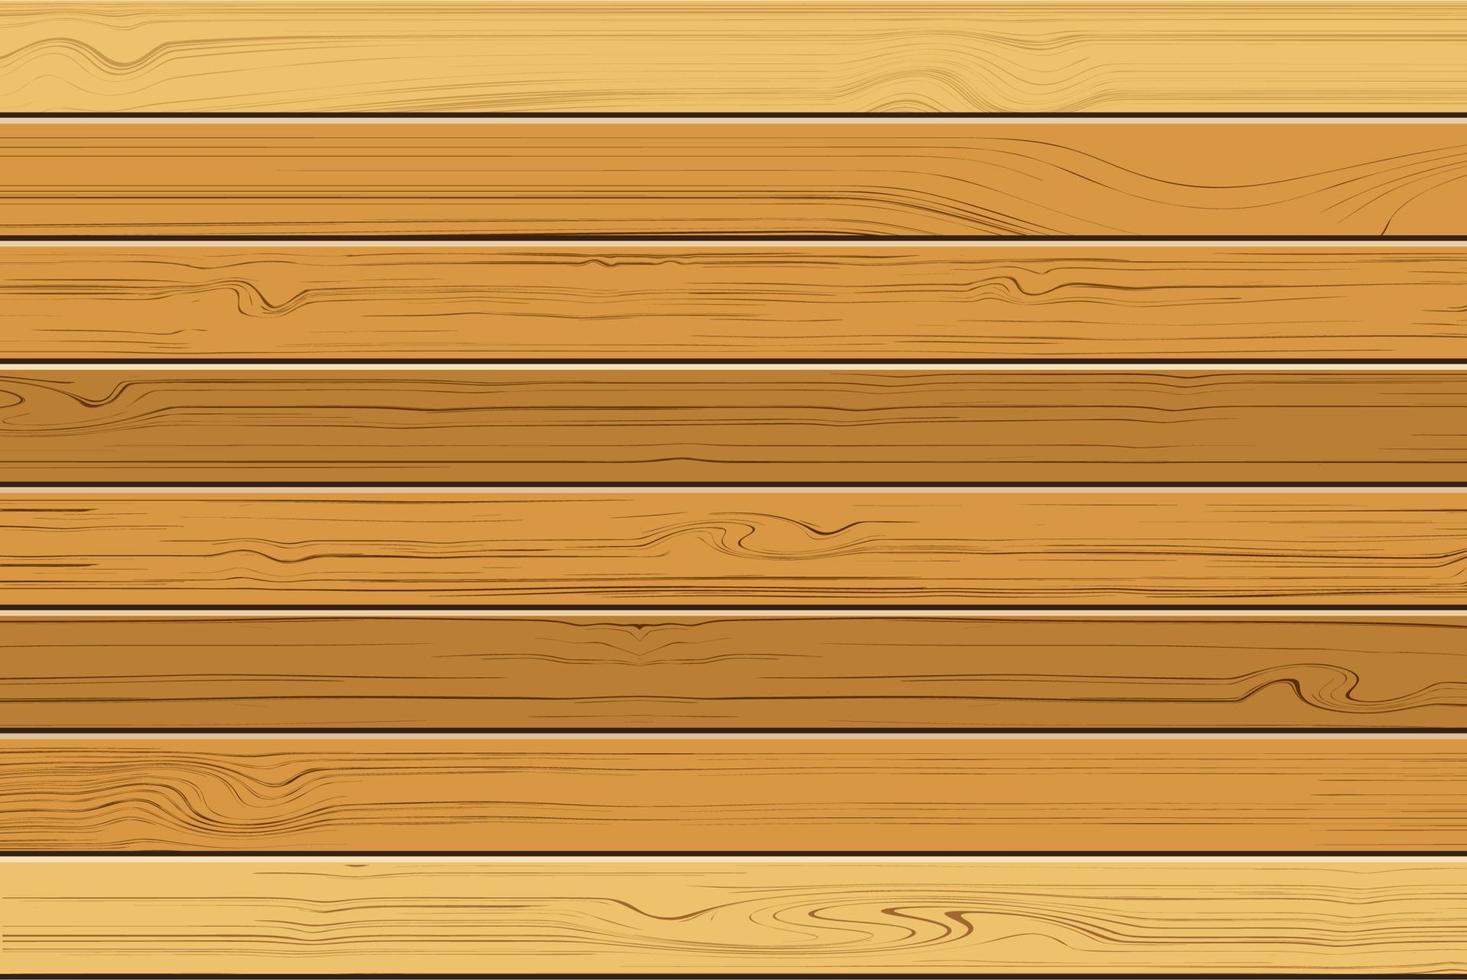 Texture of brown wooden with horizontal planks boards, vector illustration